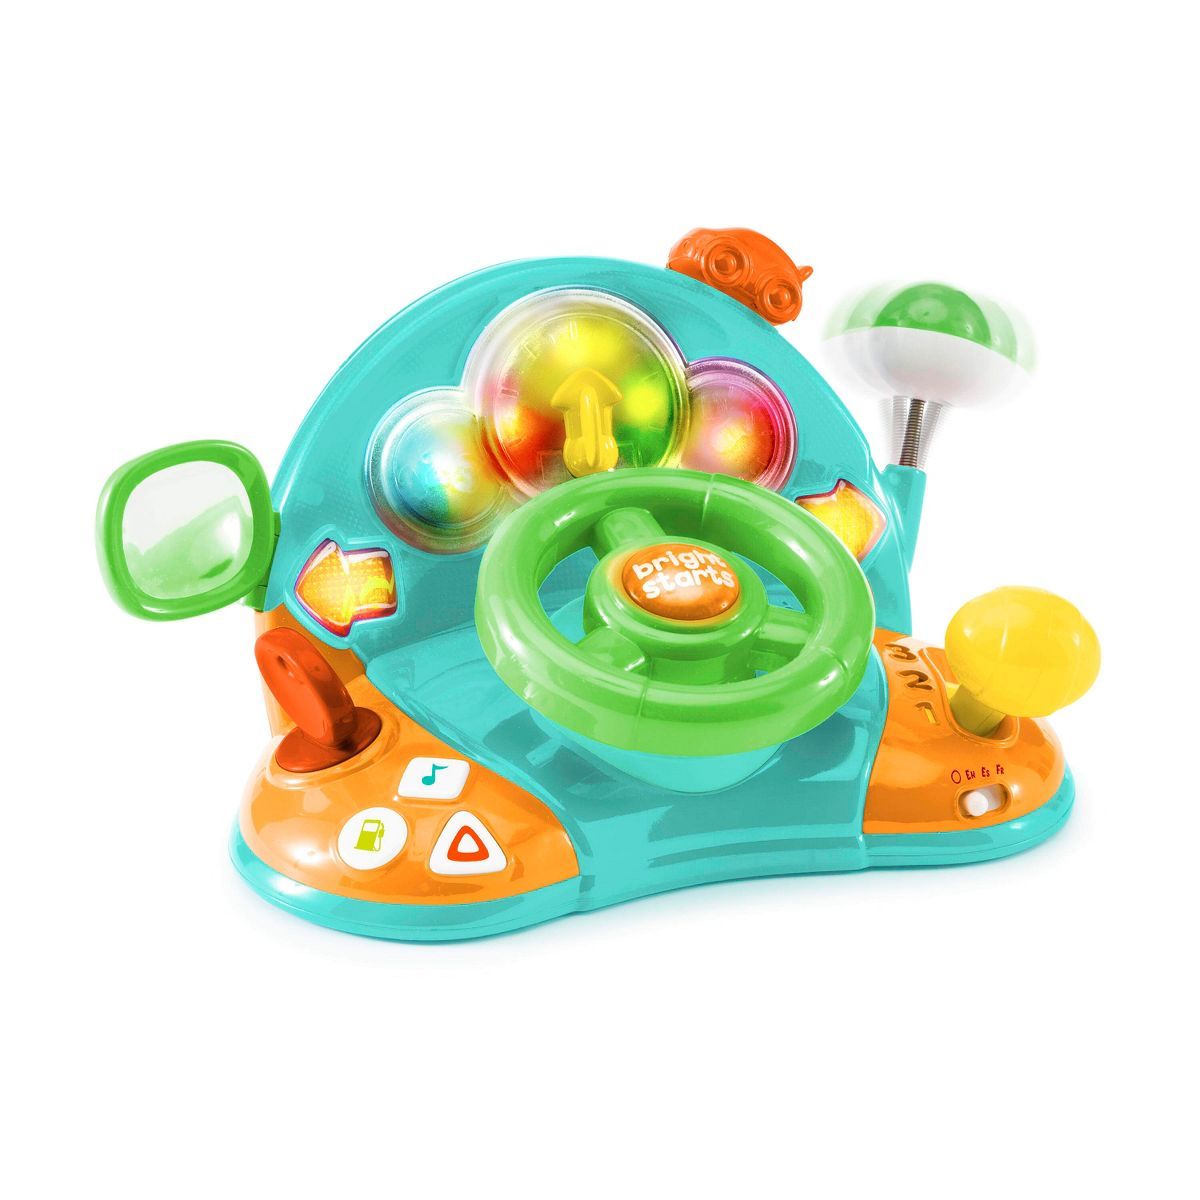 Bright Starts Lights & Colors Driver Steering Wheel Baby Toy | Target